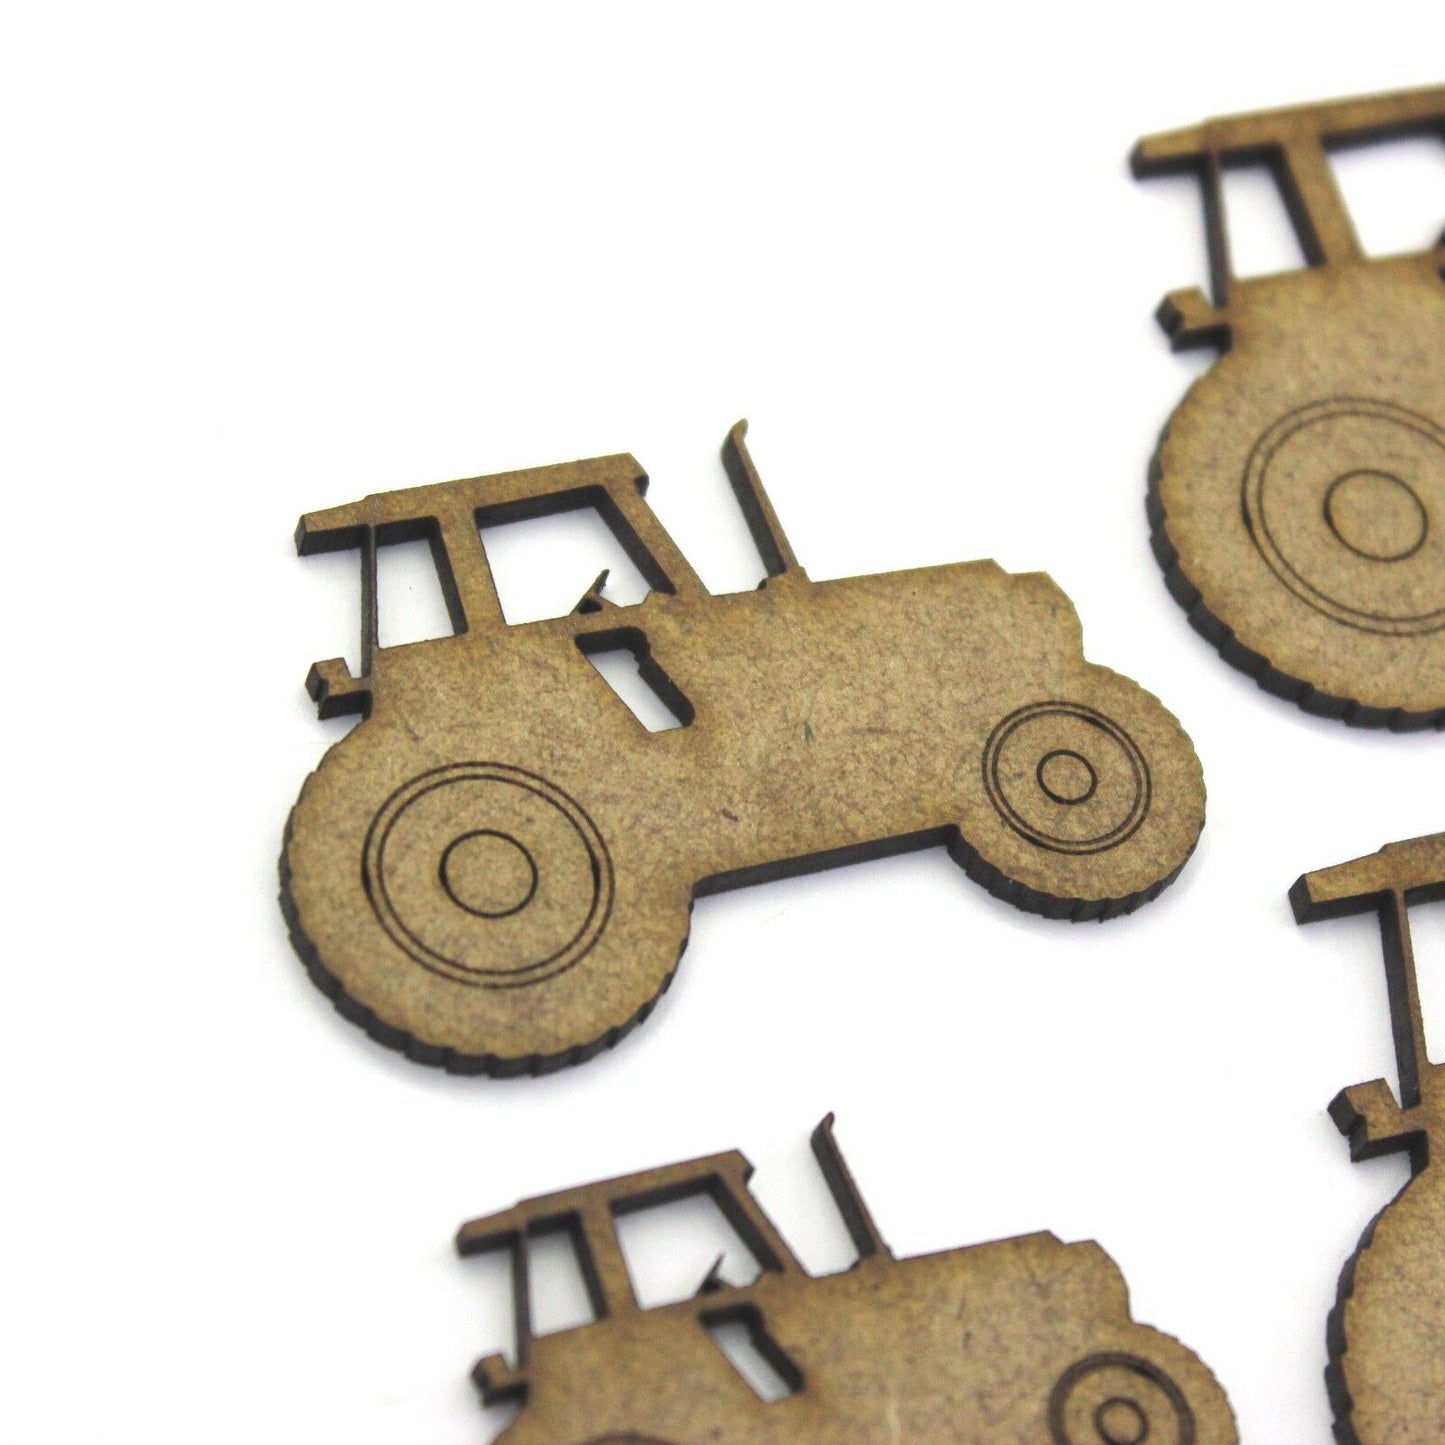 Tractor Craft Shape, Various Sizes, 2mm MDF Wood. Farm Farming Vehicle